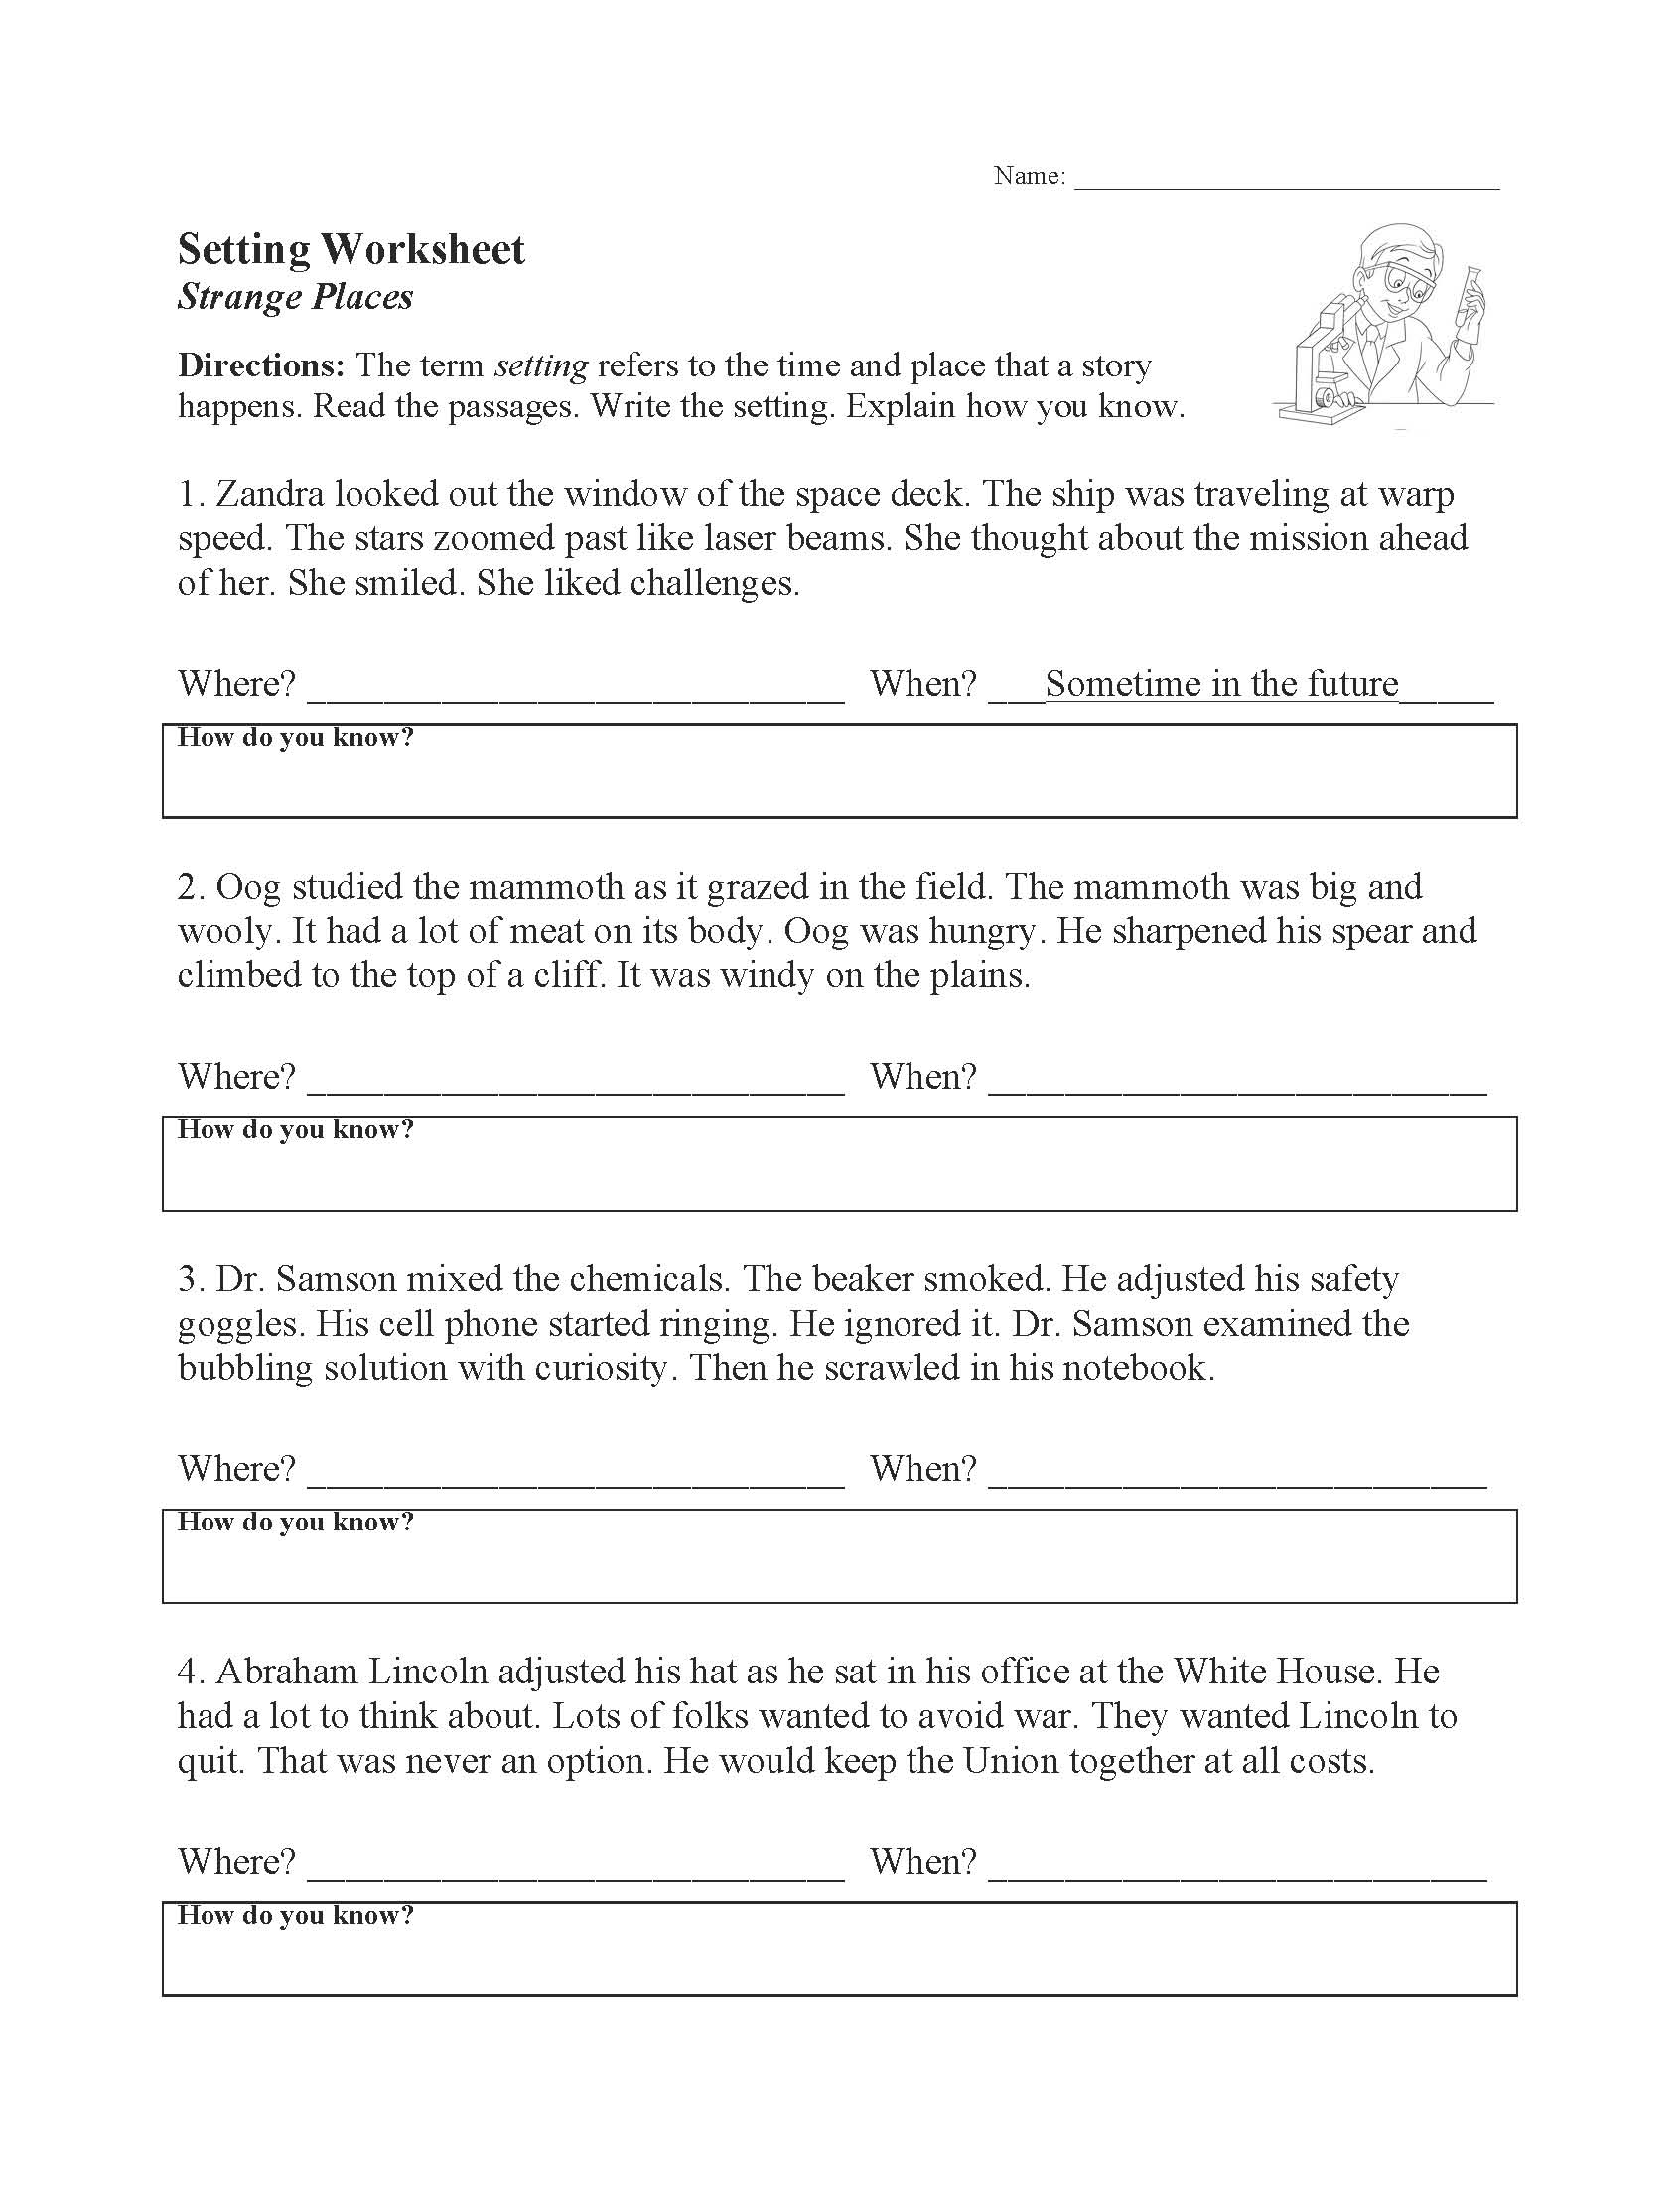 Elements of Fiction Worksheets  Free for Primary Grades Throughout Elements Of Fiction Worksheet